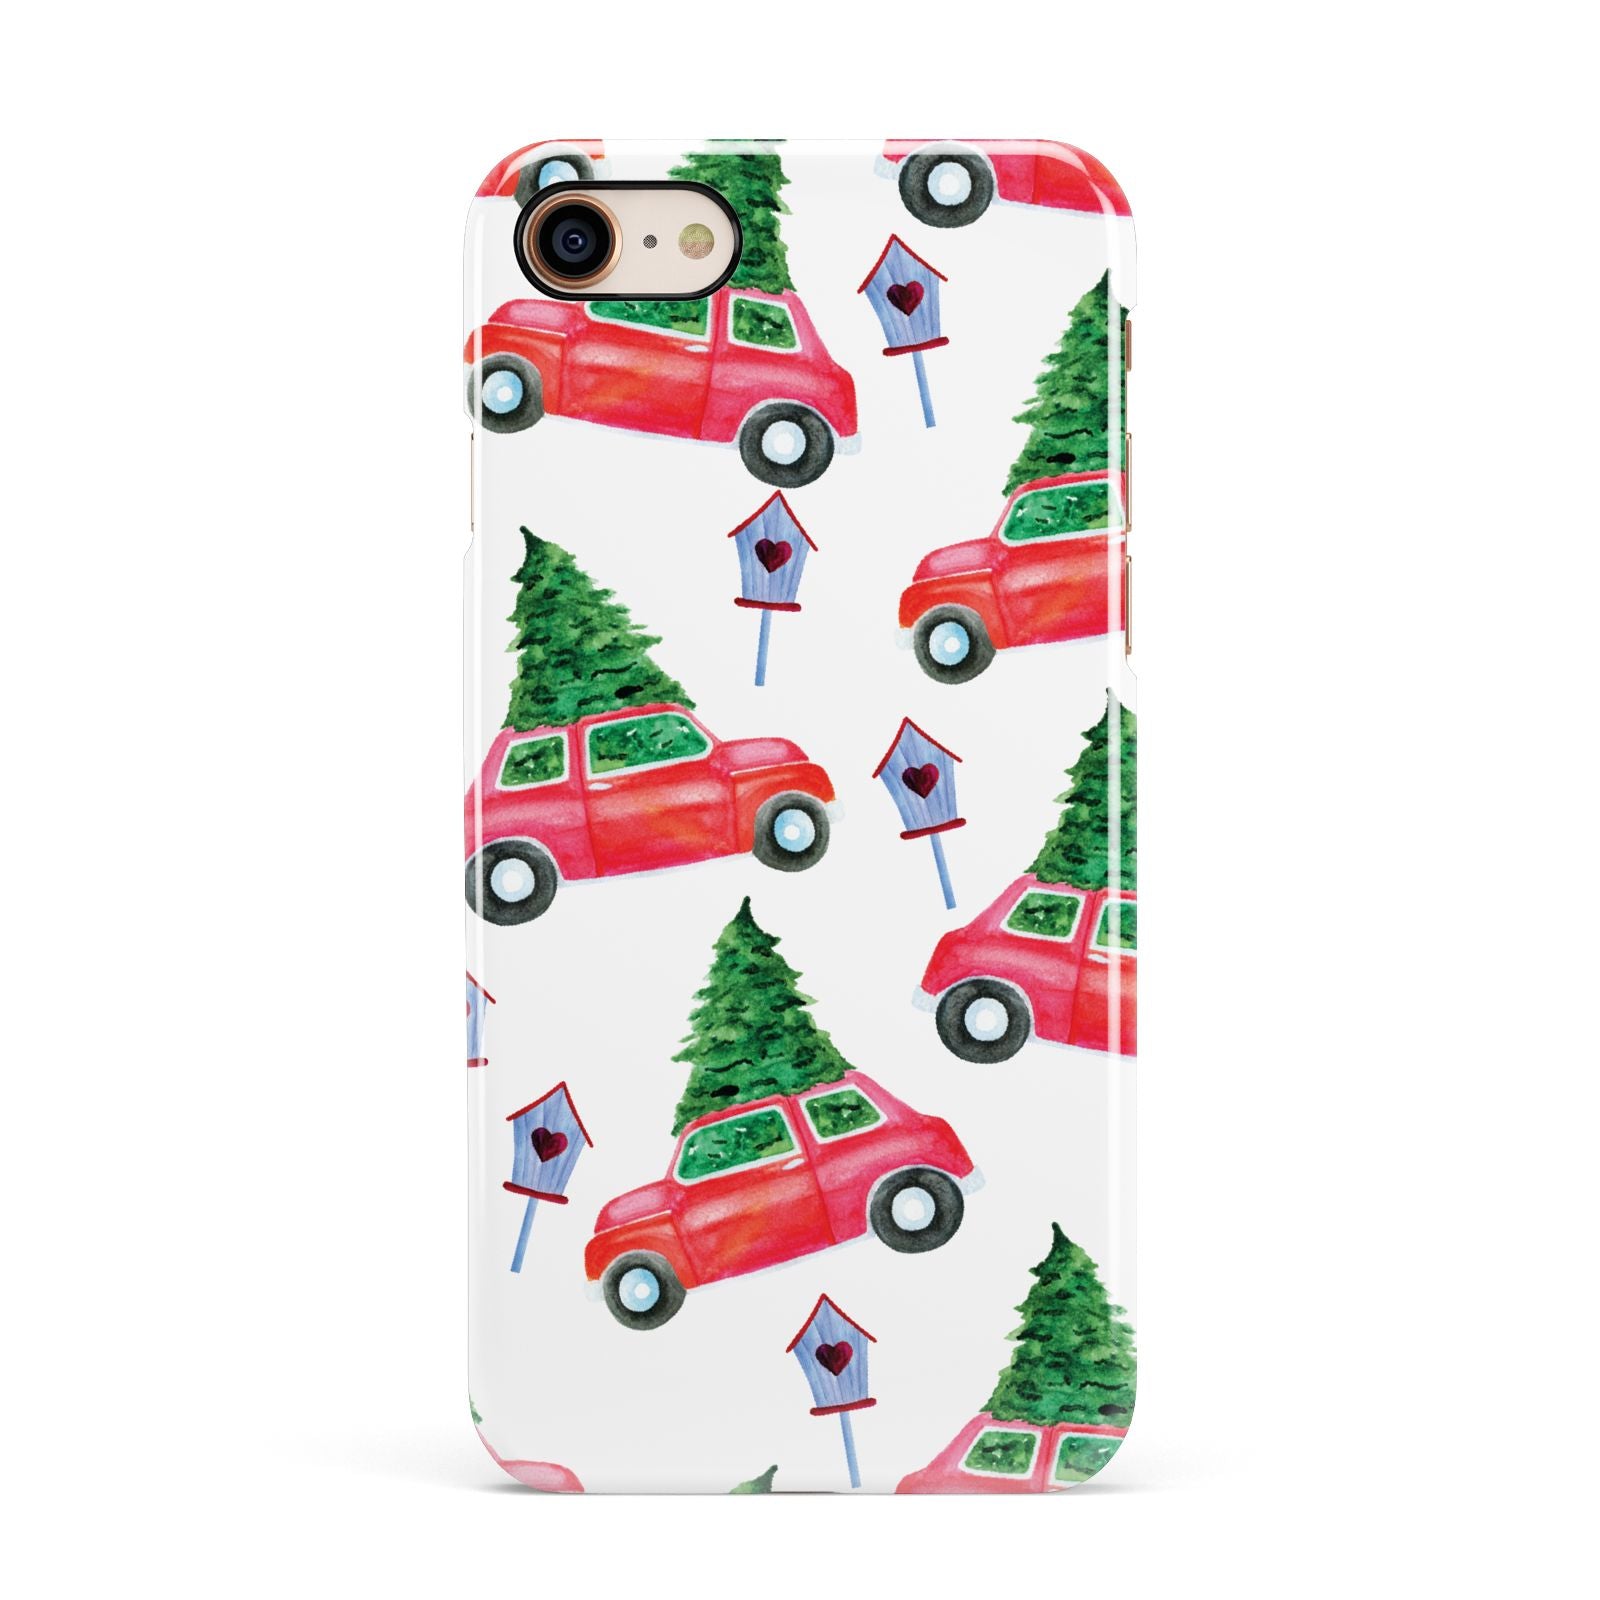 Driving home for Christmas Apple iPhone 7 8 3D Snap Case